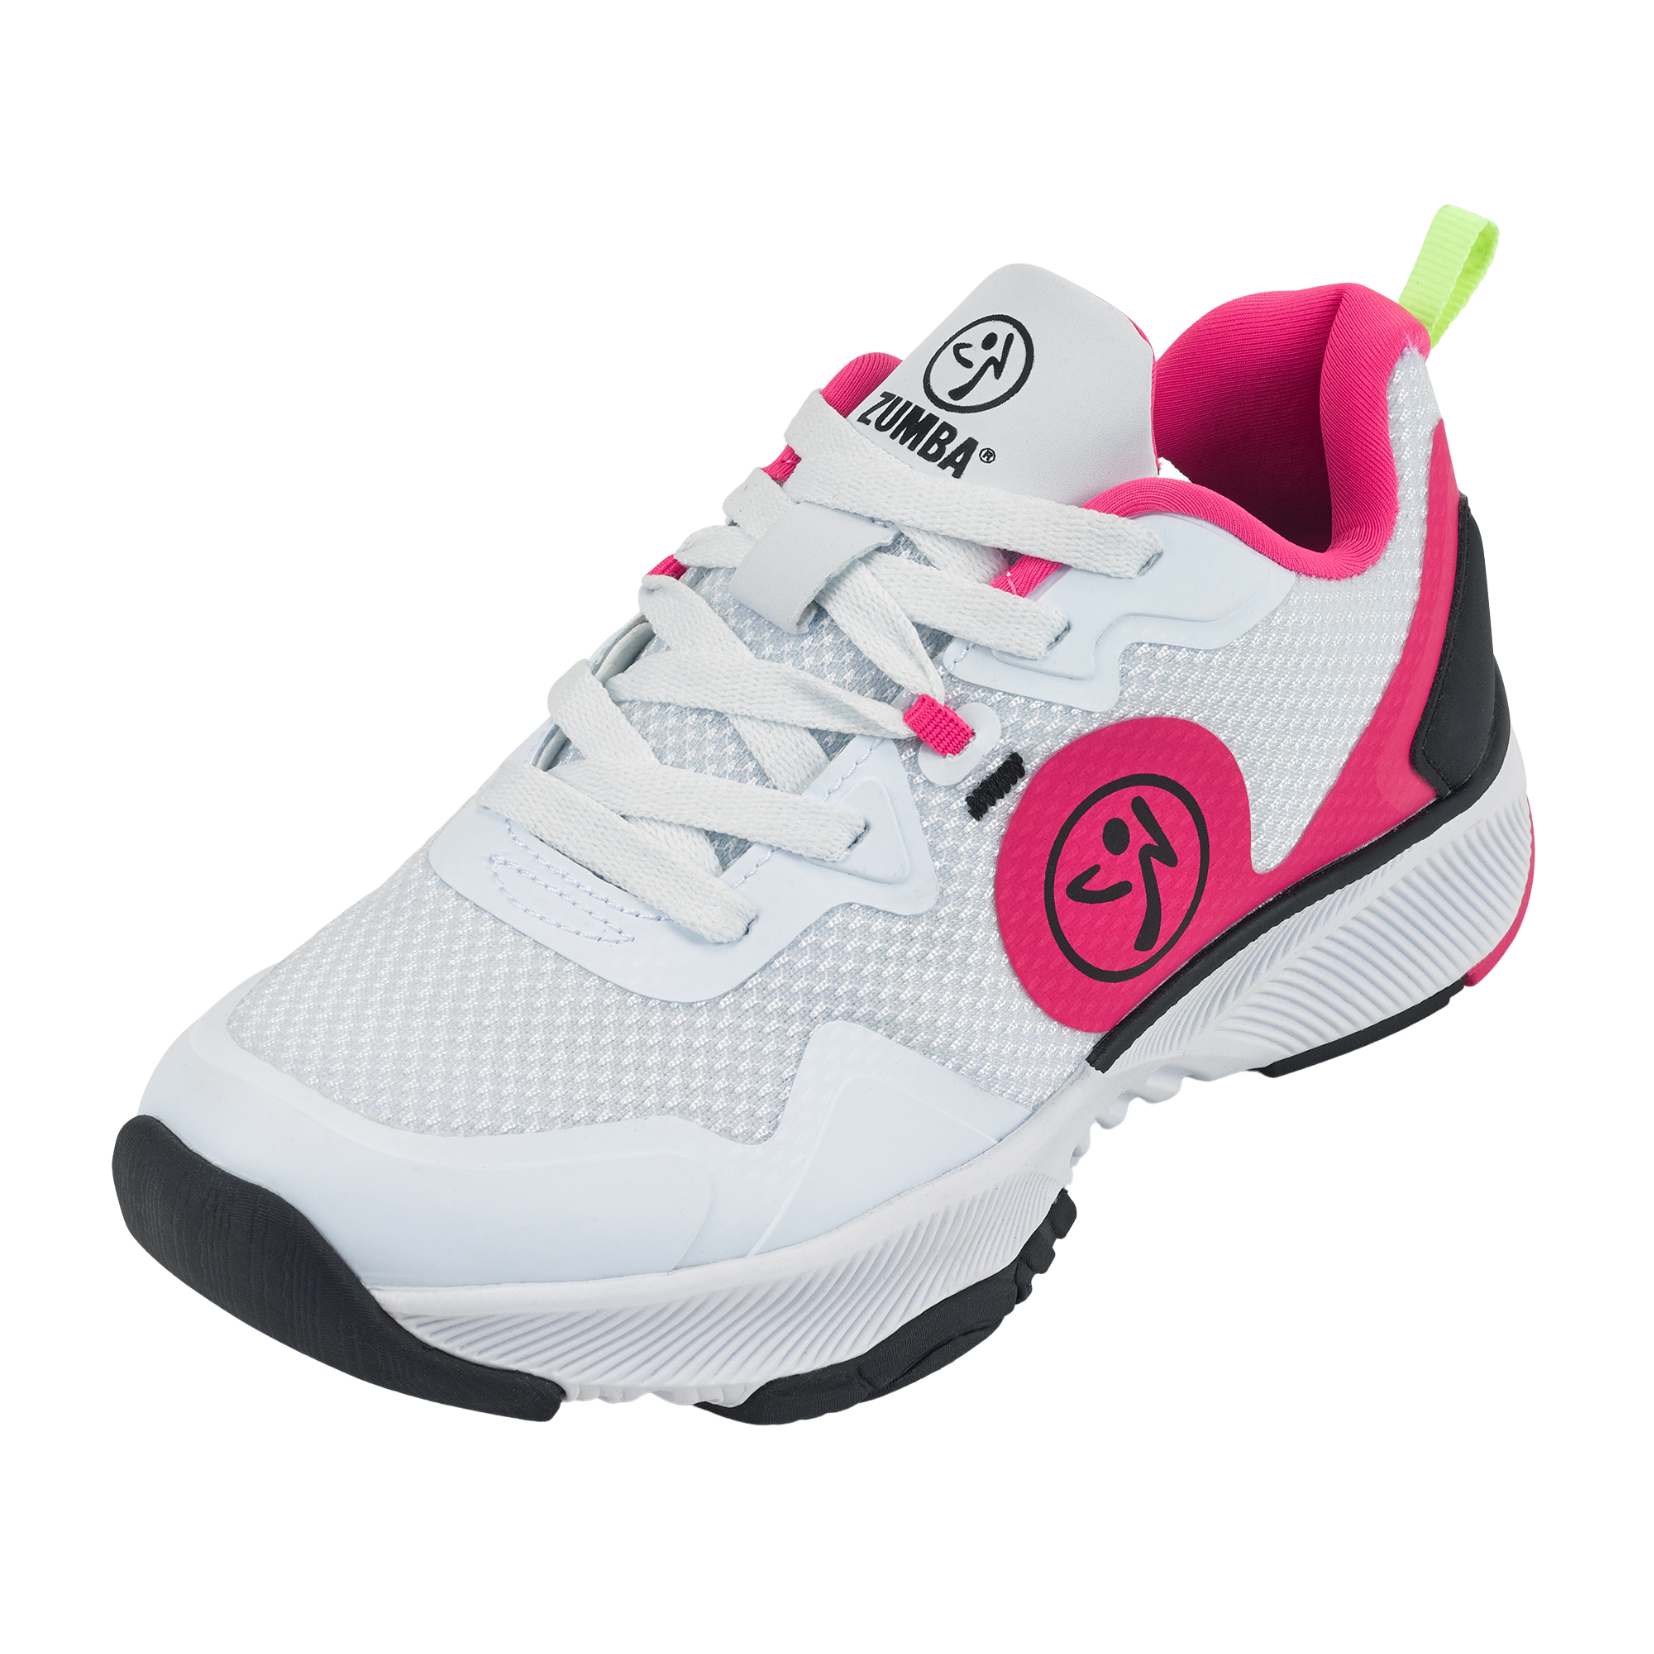 Zumba Train 2.0 - Pink (Special Order)